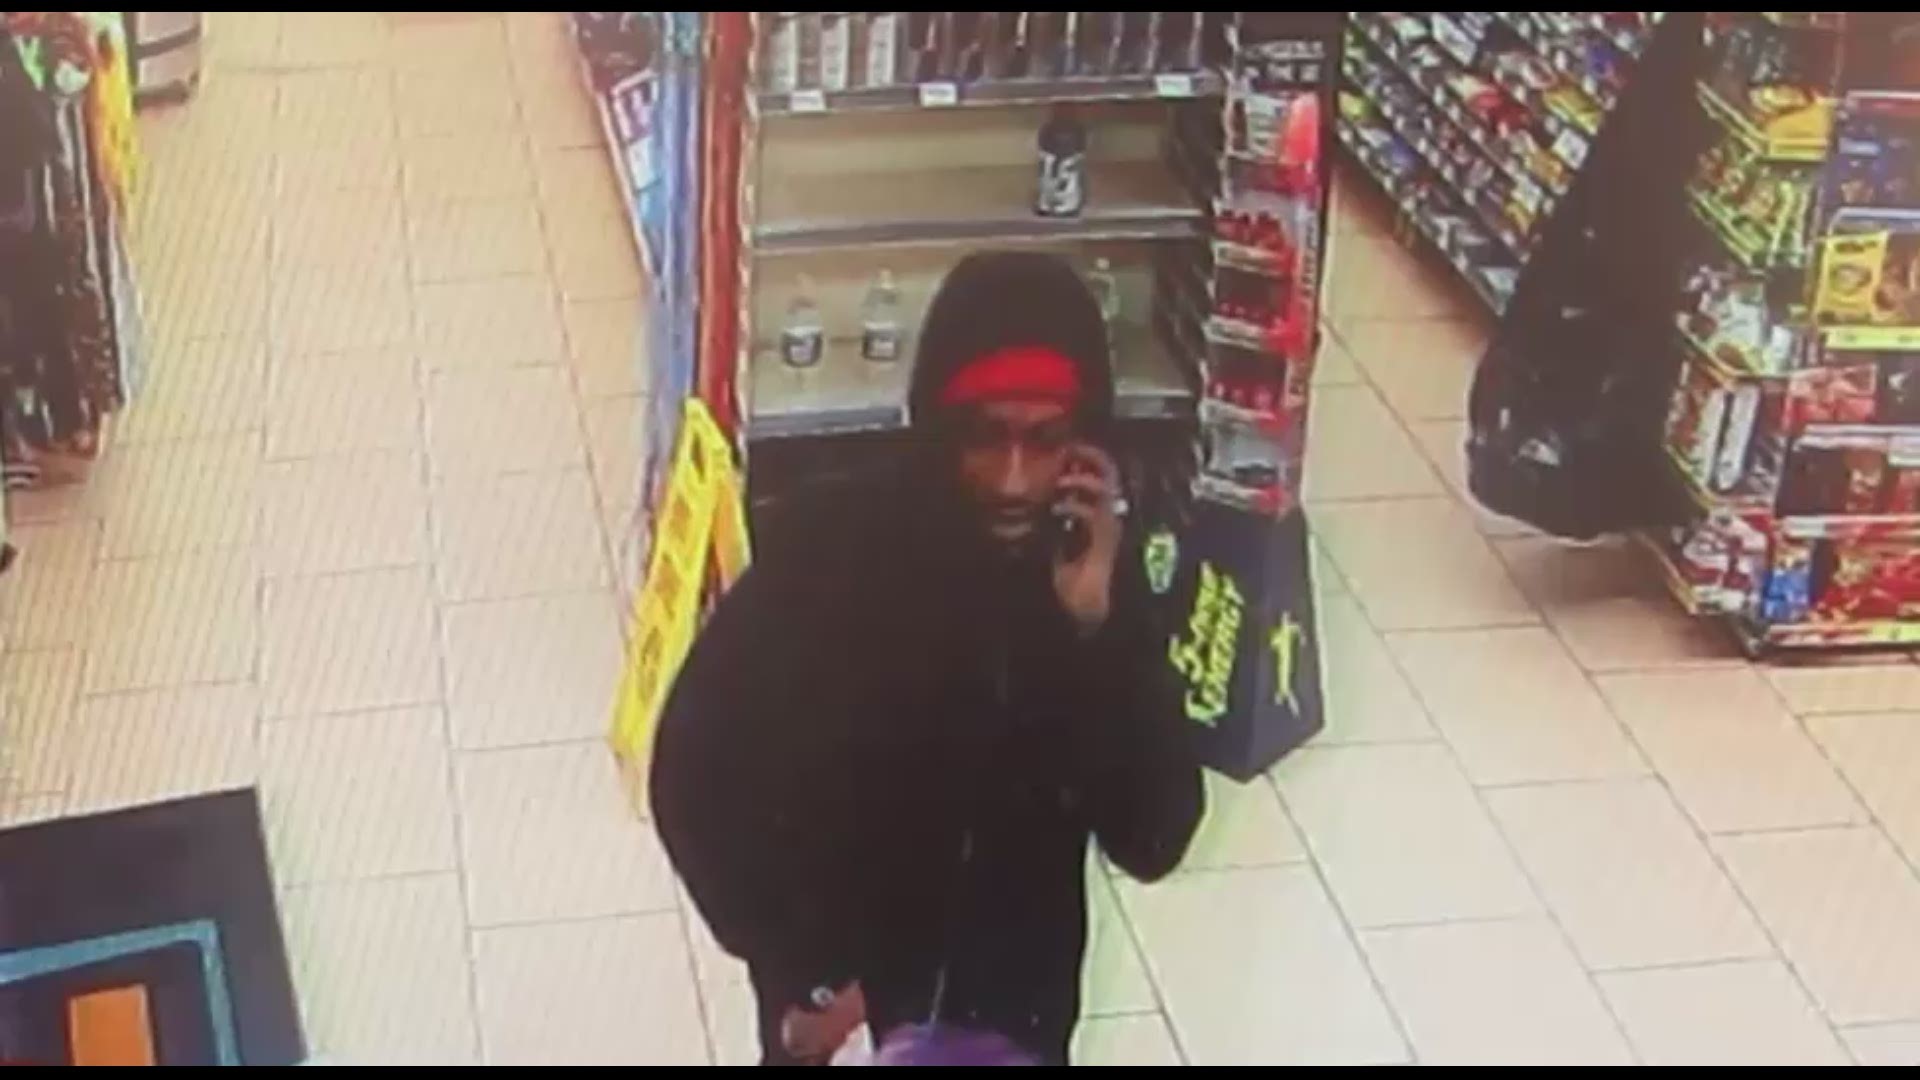 Police said this man in the photo fired his weapon during a robbery inside a Newport News 7-Eleven early morning Friday. (Credit: Newport News Police Department)